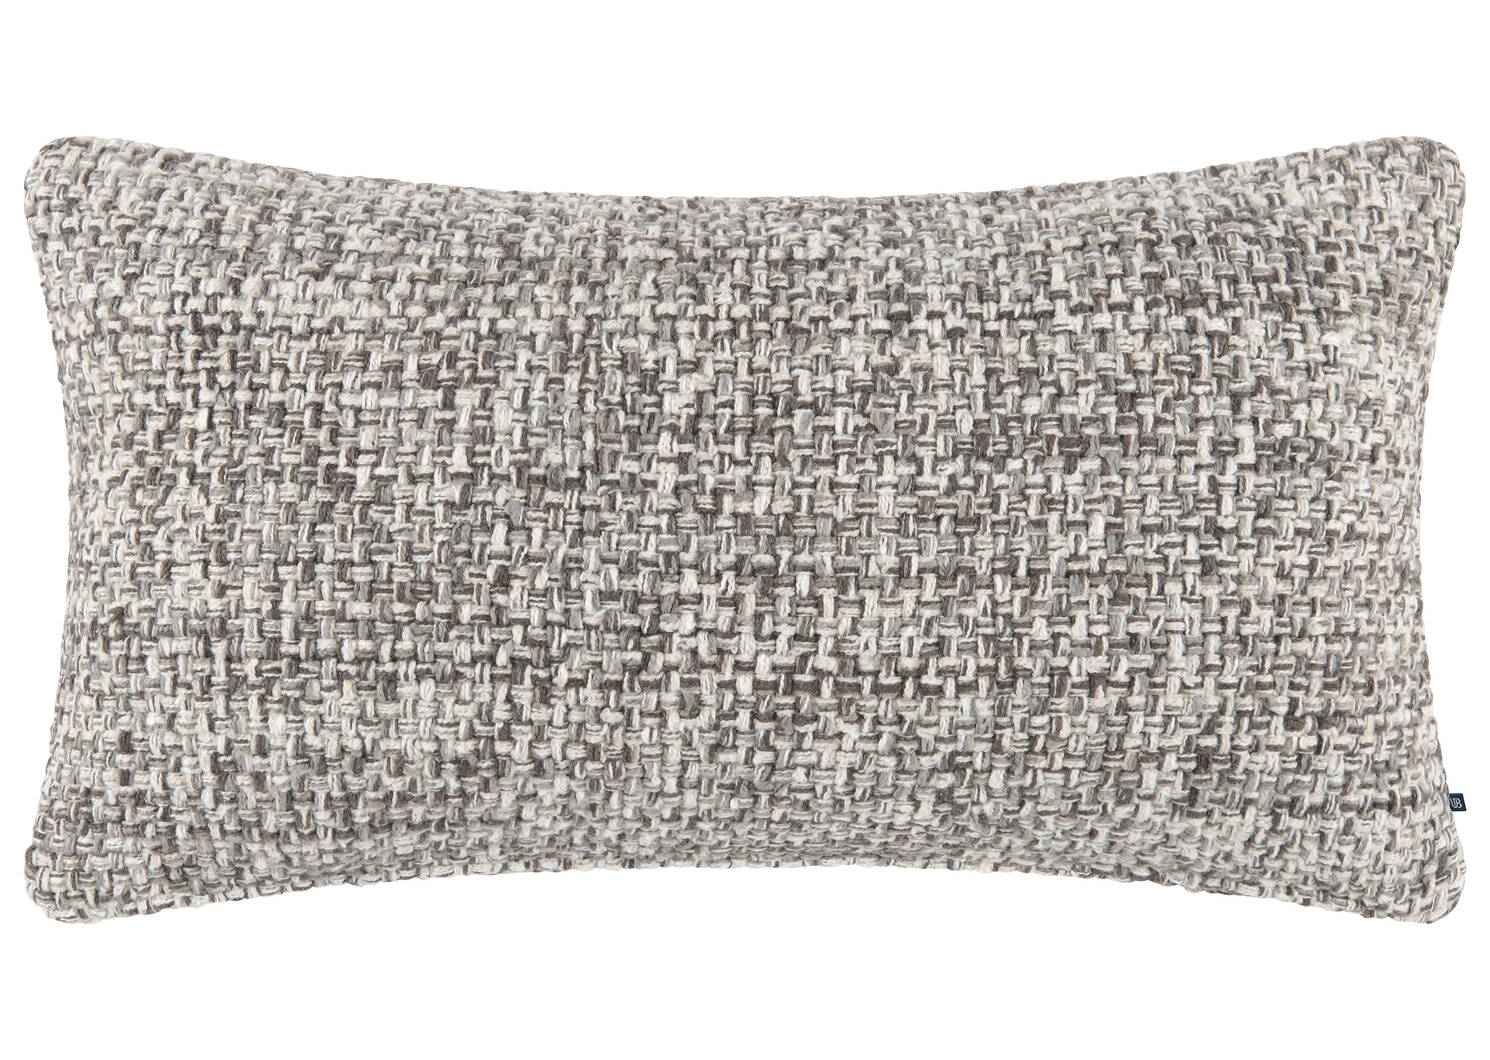 Hayes Boucle Pillow 12x22 Ivory/Grey